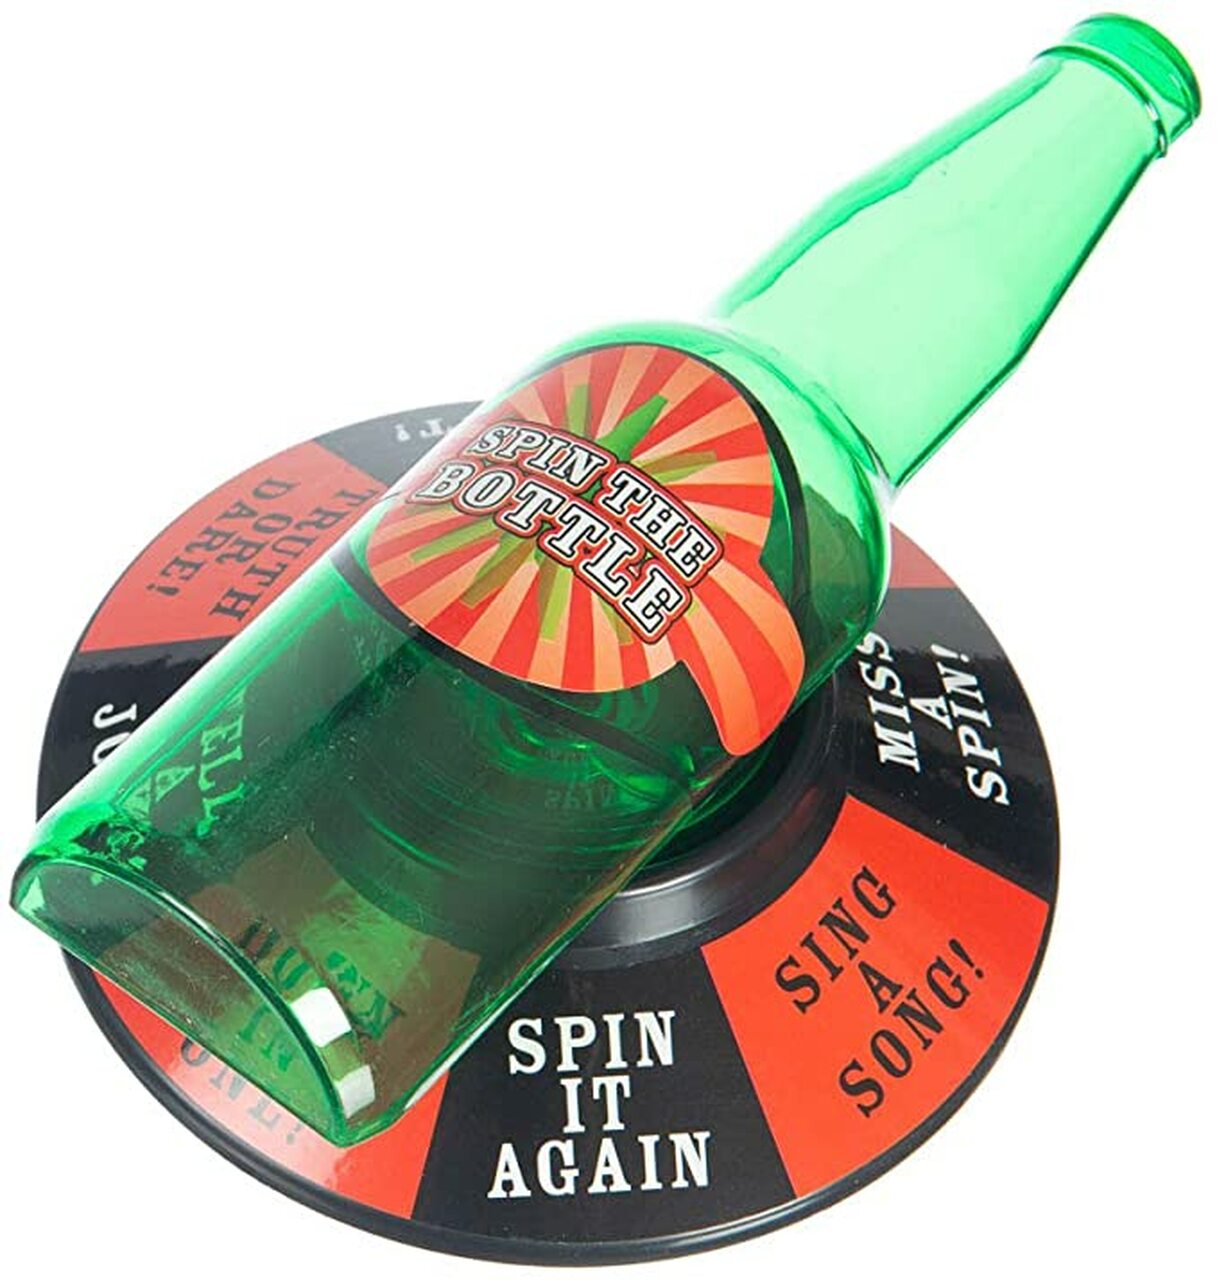 SPIN THE BOTTLE